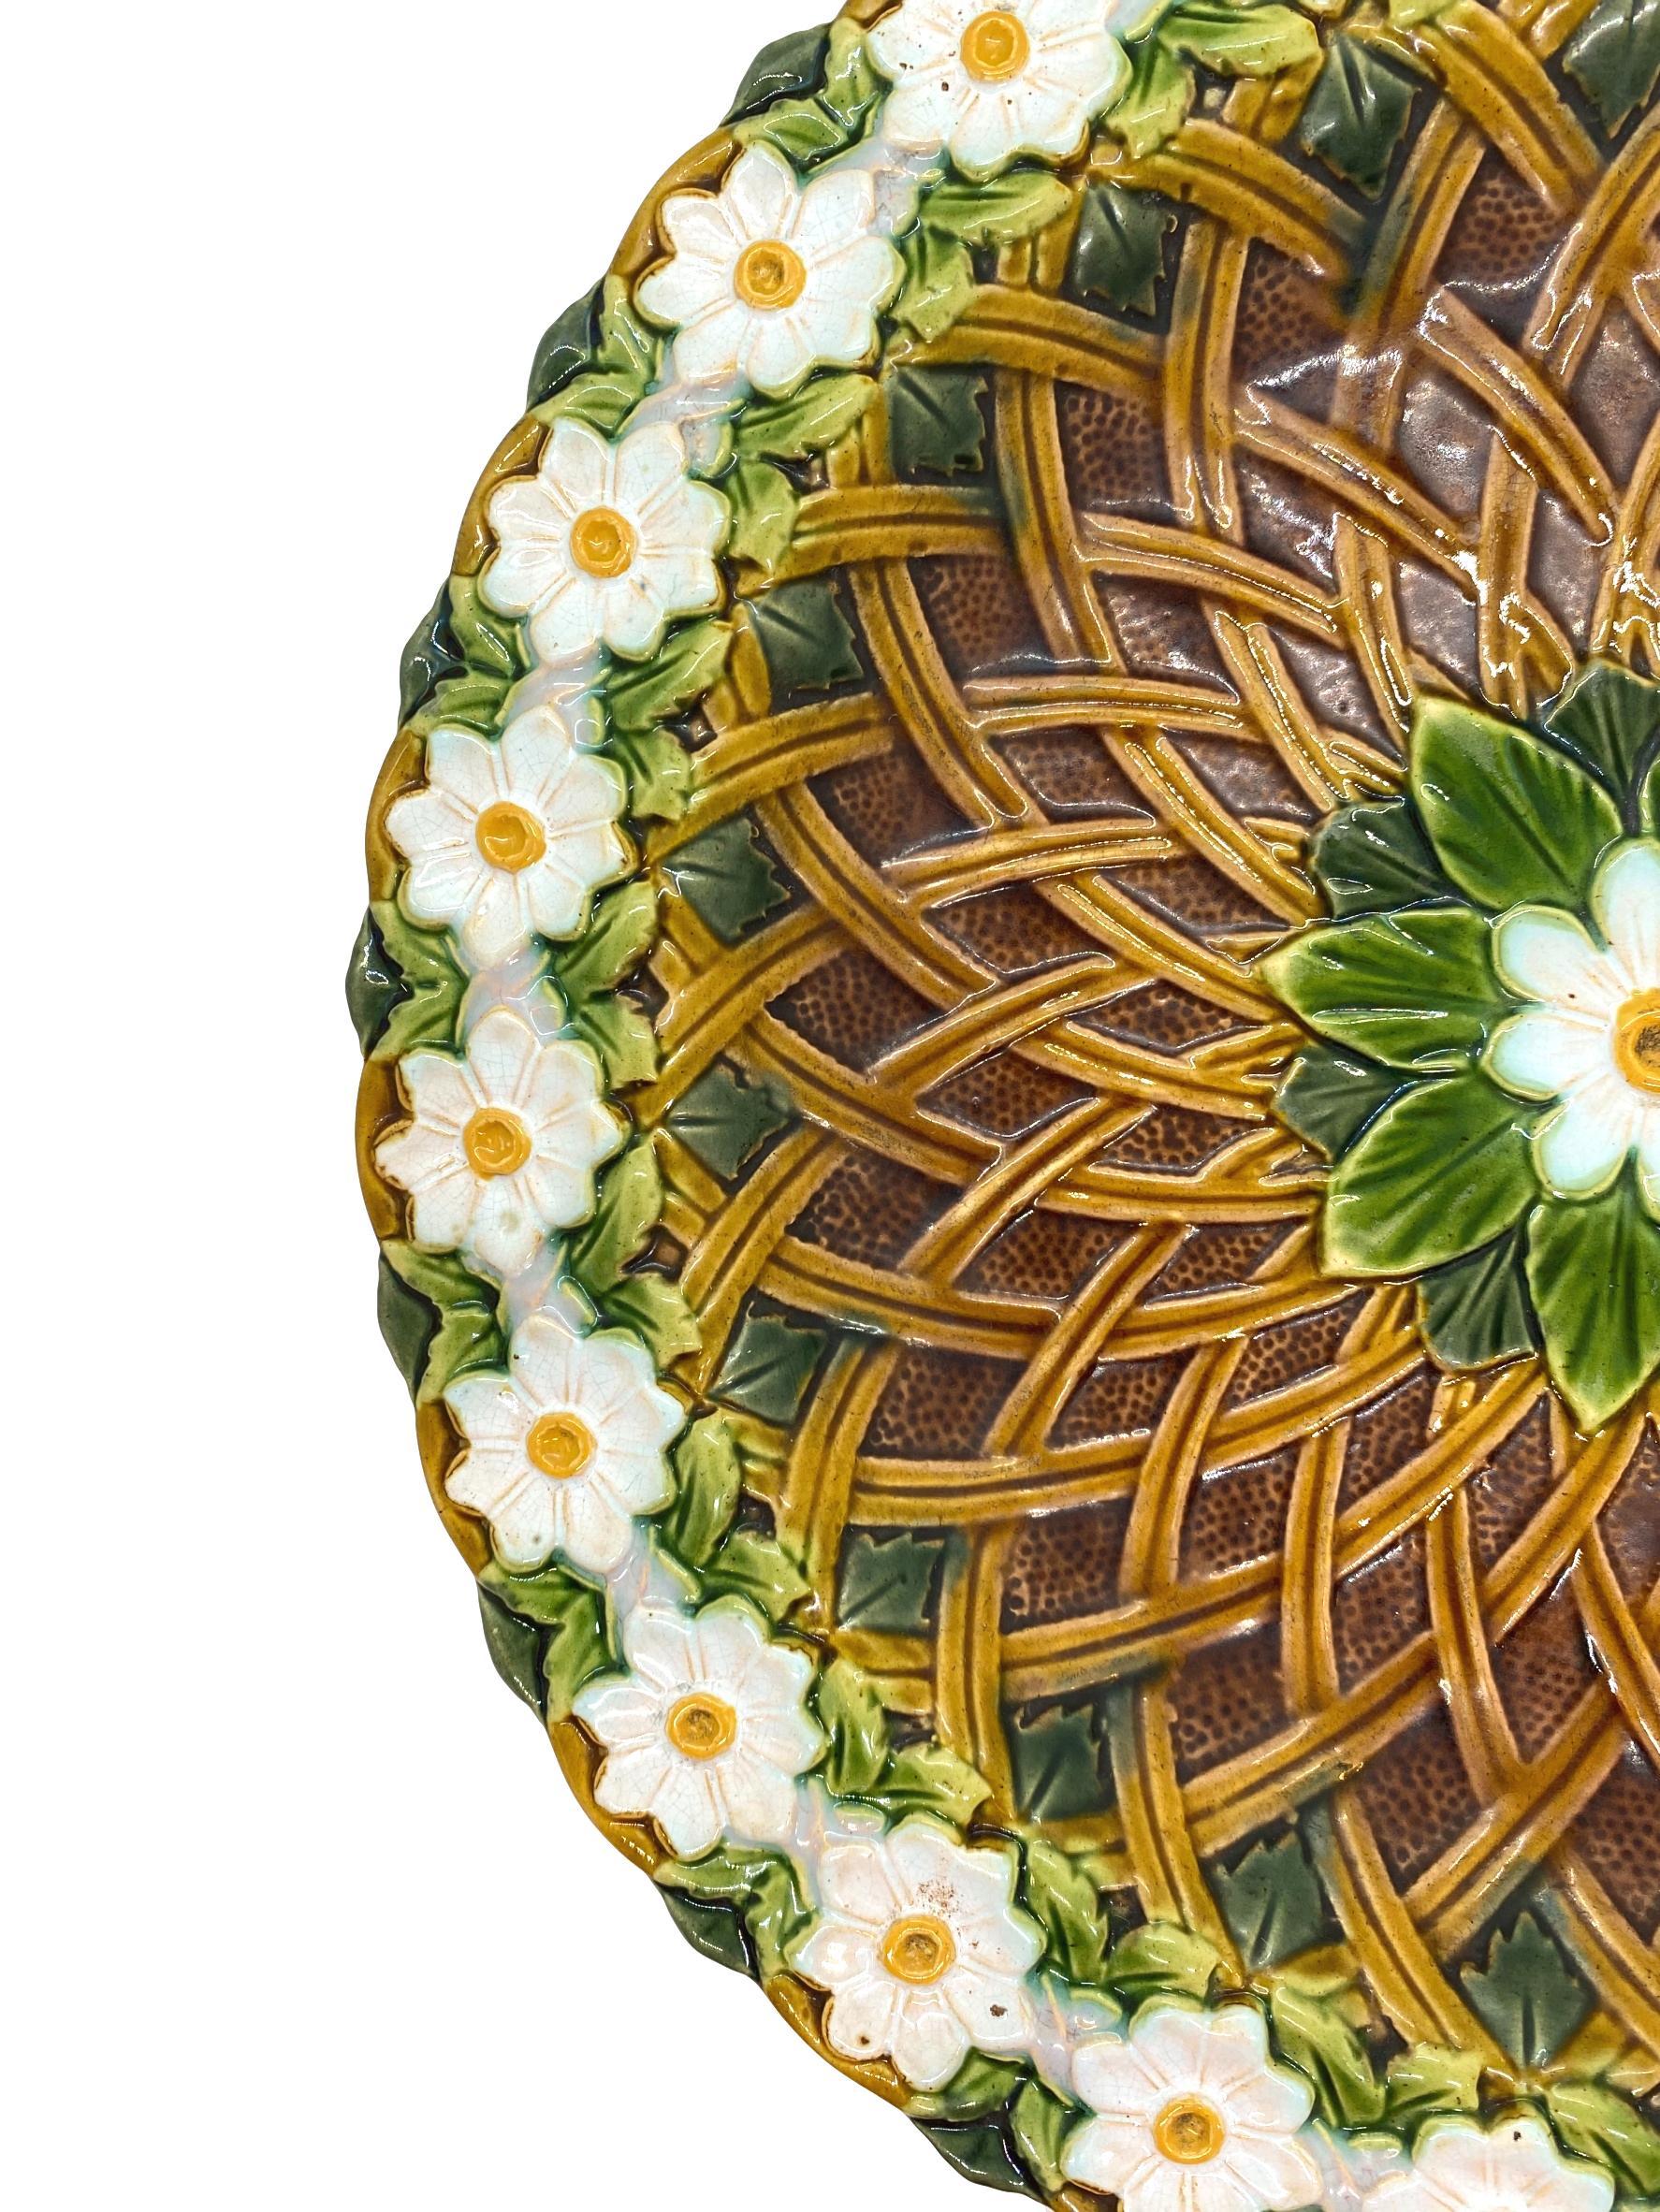 Minton Majolica platter, molded in high relief with a central medallion of leaves and a daisy, surrounded by basketweave latticework, with a continuous chain of daisies forming the border, impressed marks to reverse, 'MINTONS' and Minton date cypher